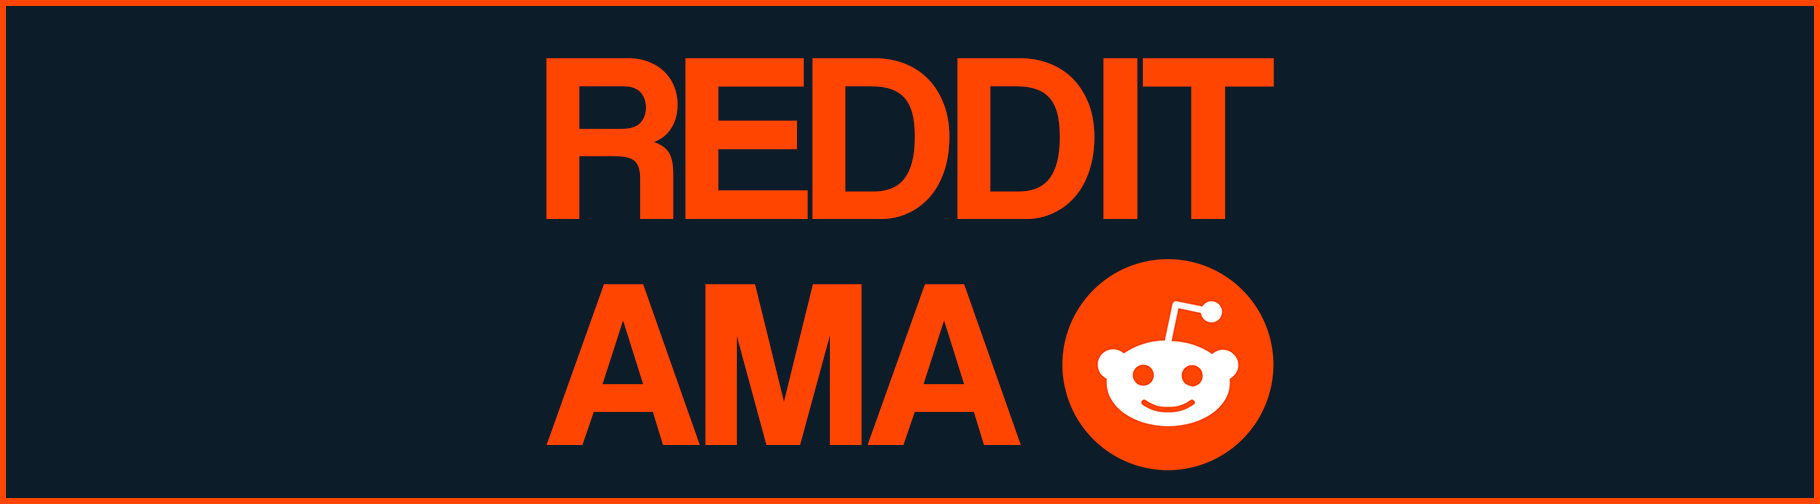 'REDDIT AMA' Written on the center of the image with reddit's logo. The font is orange, and the background is dark blue.